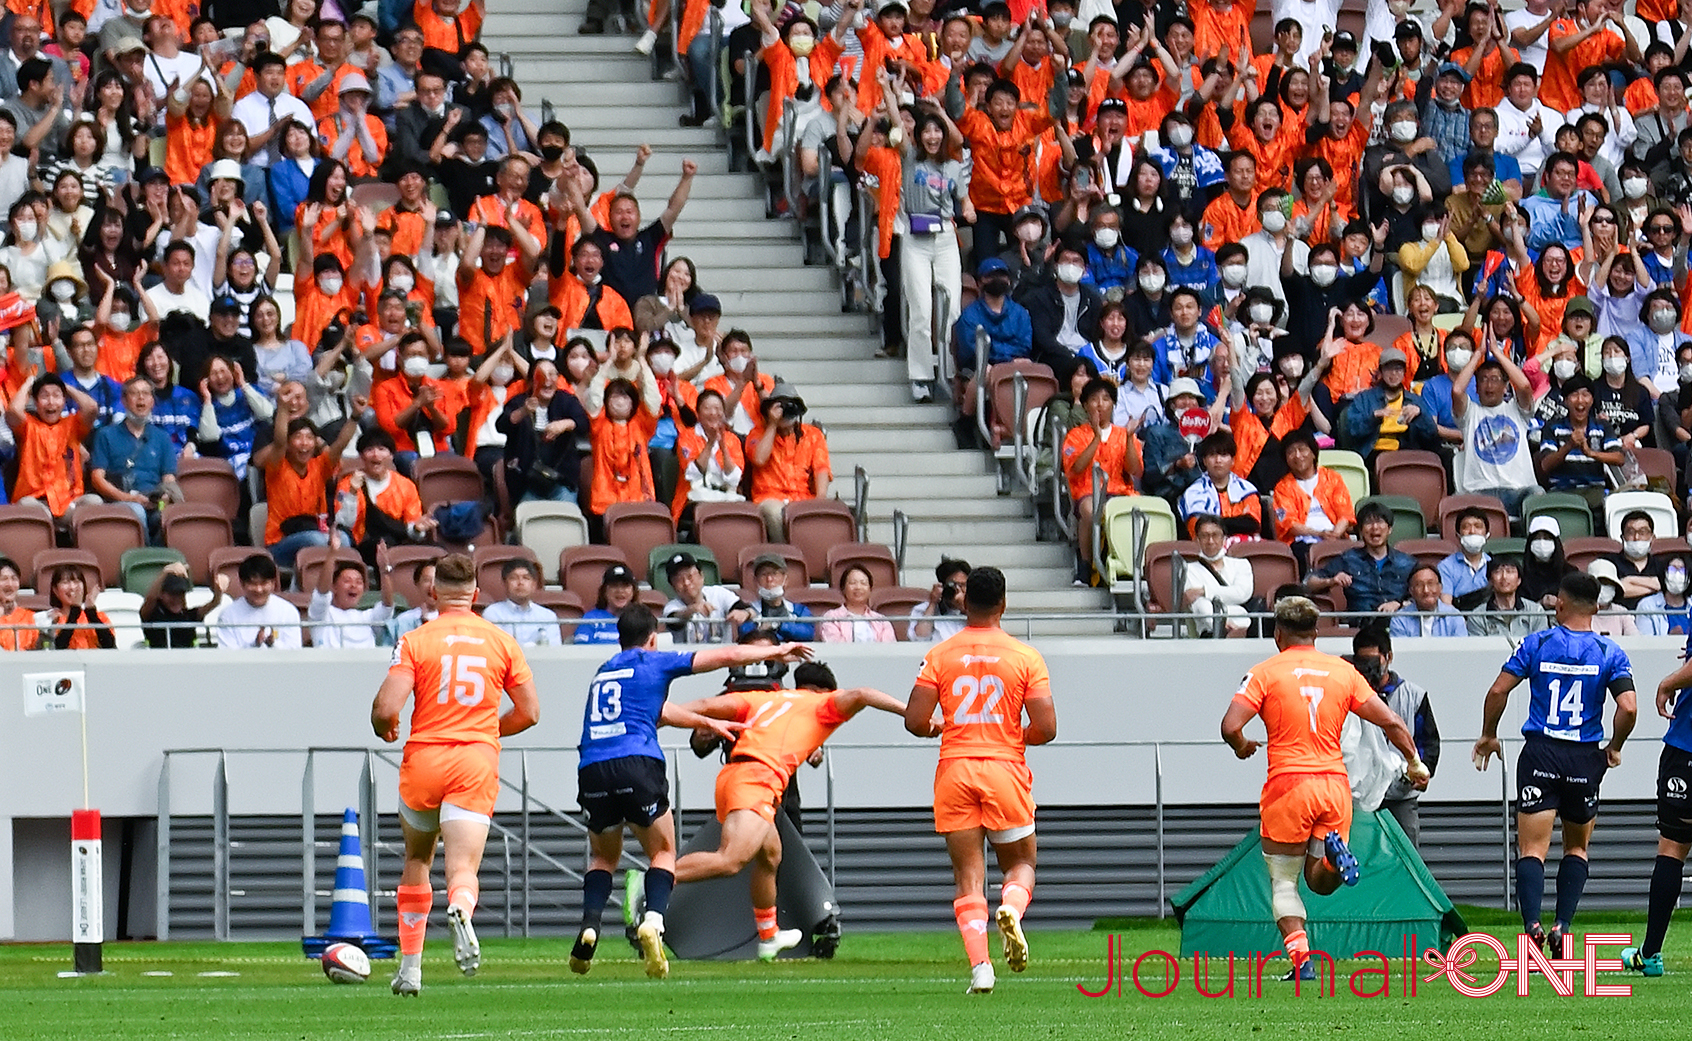 Japan Rugby League One final match, Haruto Kida (Japan rugby union team) took a kick pass from Harimichi Tachikawa(RWC2019 Japan rugby union team) and scored a try ; Photo by Journal-ONE